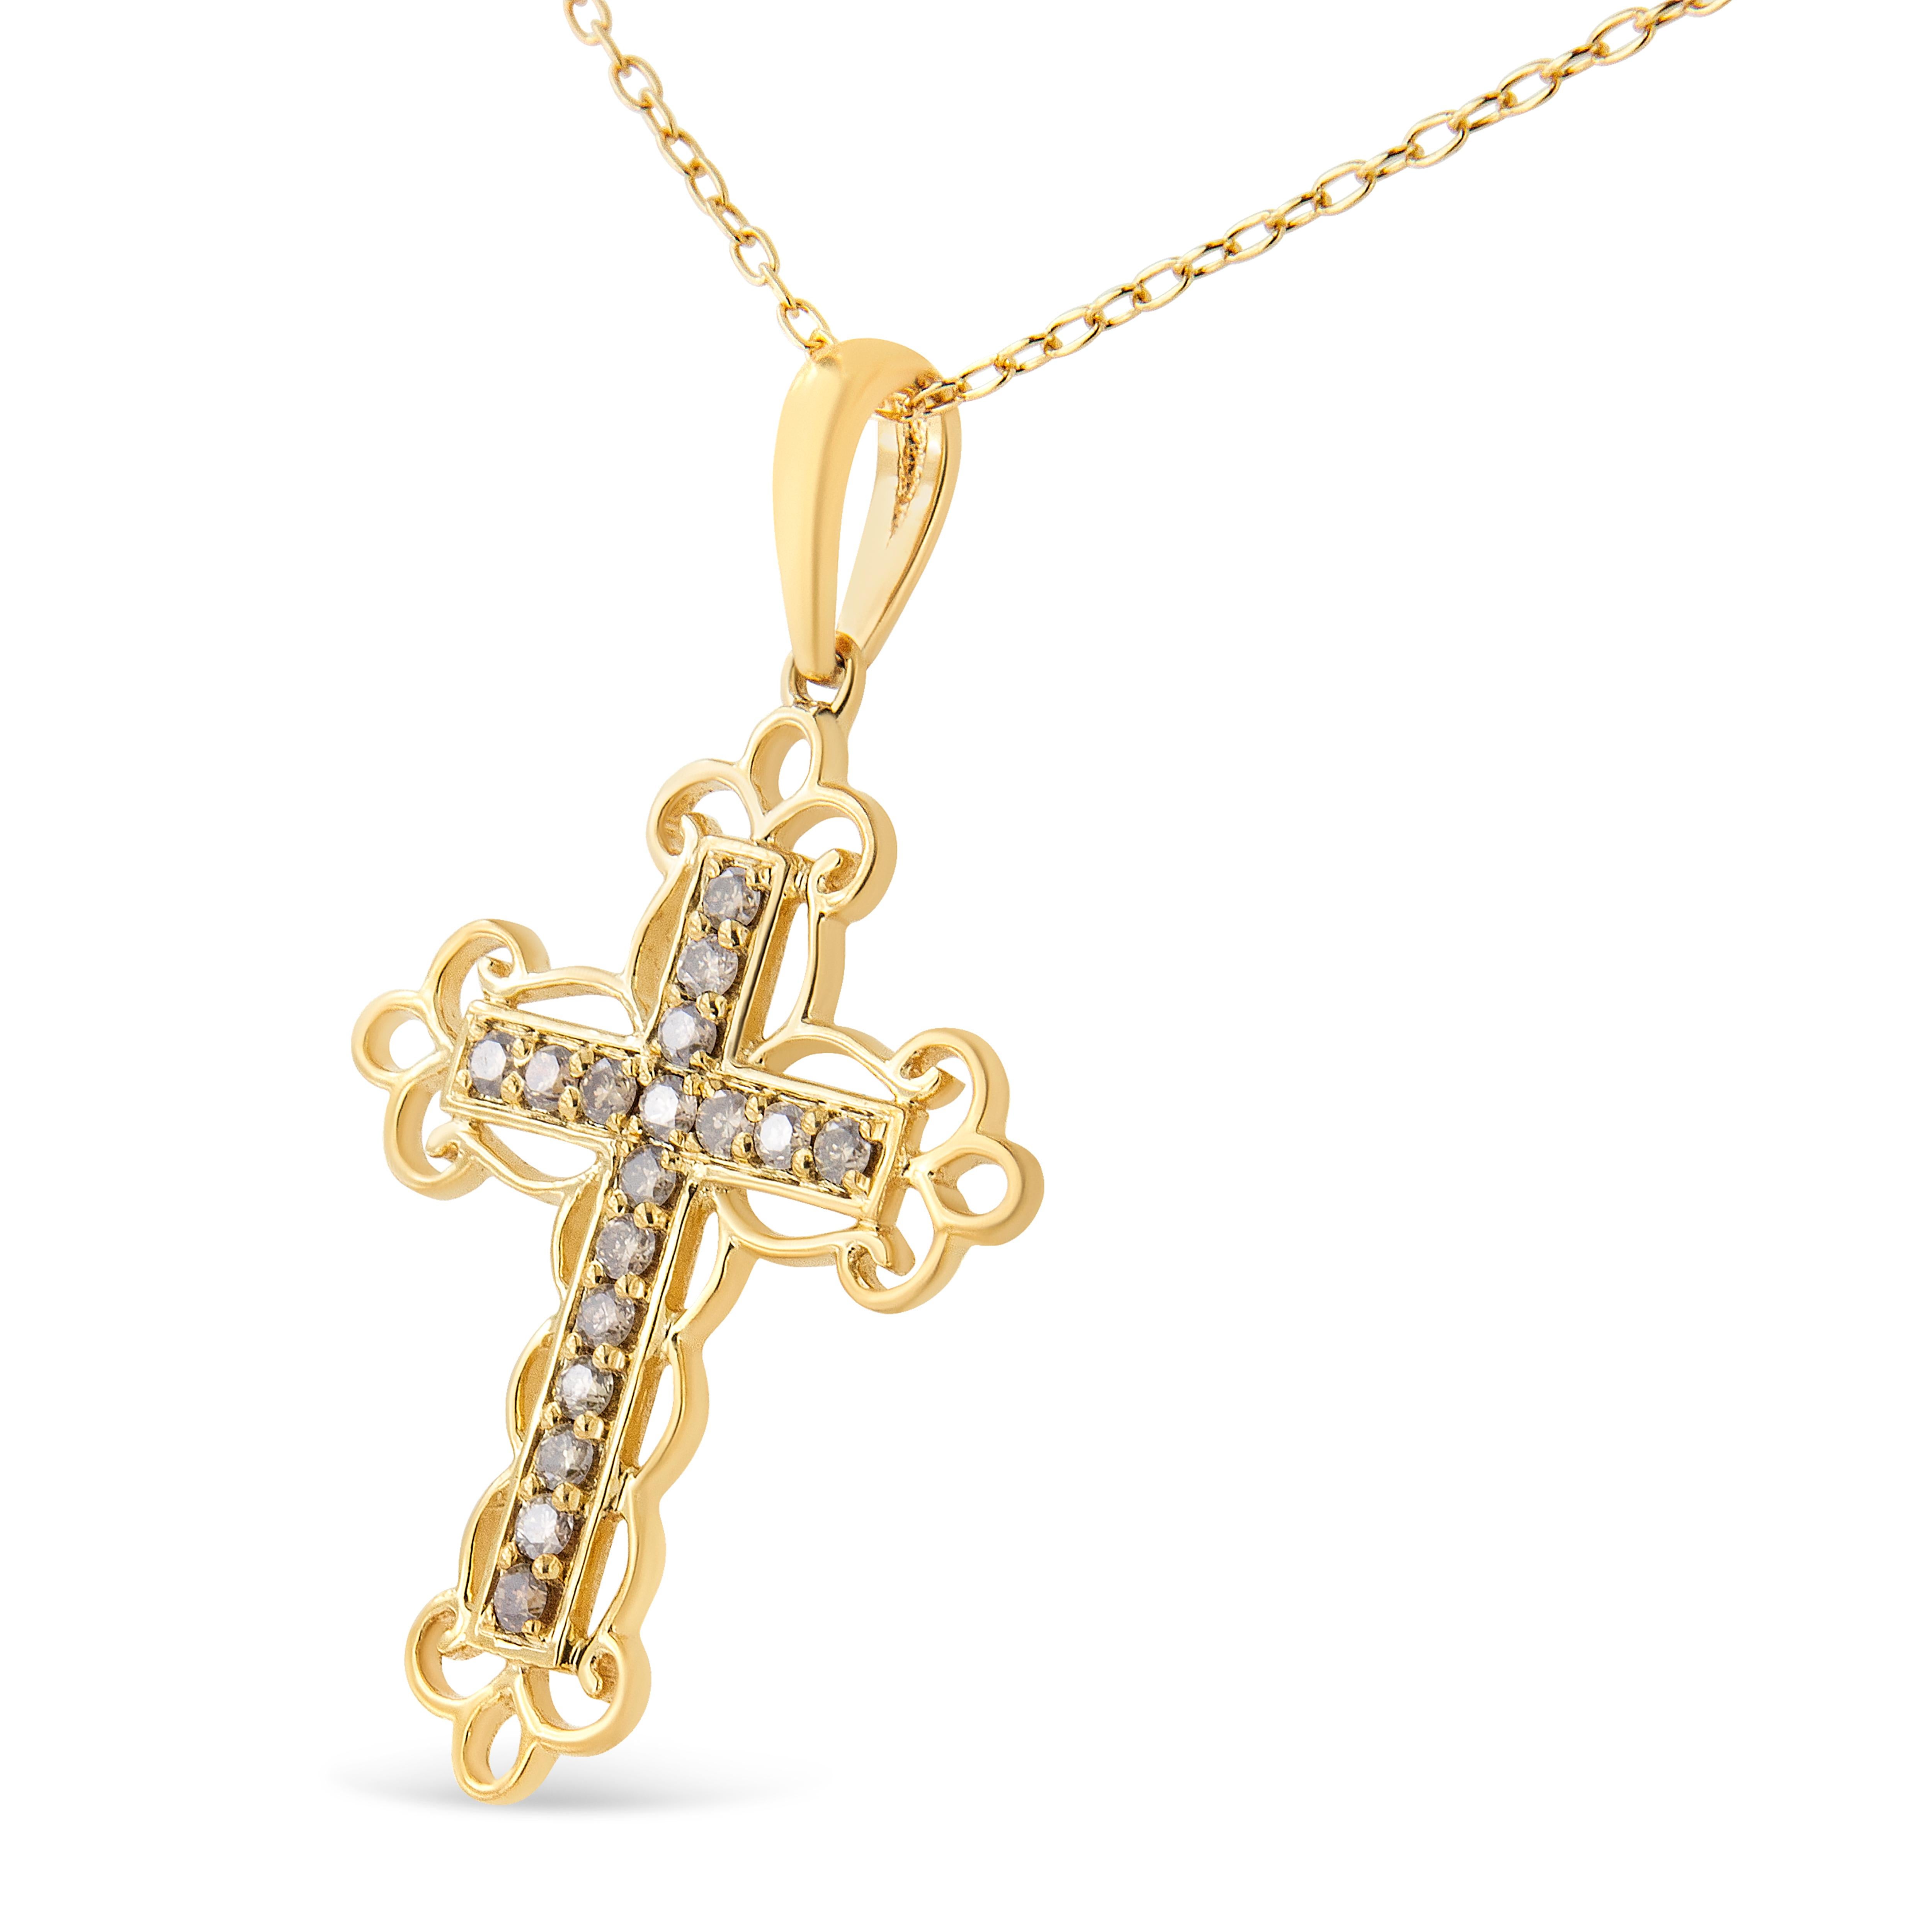 Embrace your spirituality with this unique, art-deco like filigree cross pendant. Elegant strands of 10kt yellow gold plated 925 sterling silver wrap around the cross motif in an elegant and intricate manner. This necklace is embellished with 17